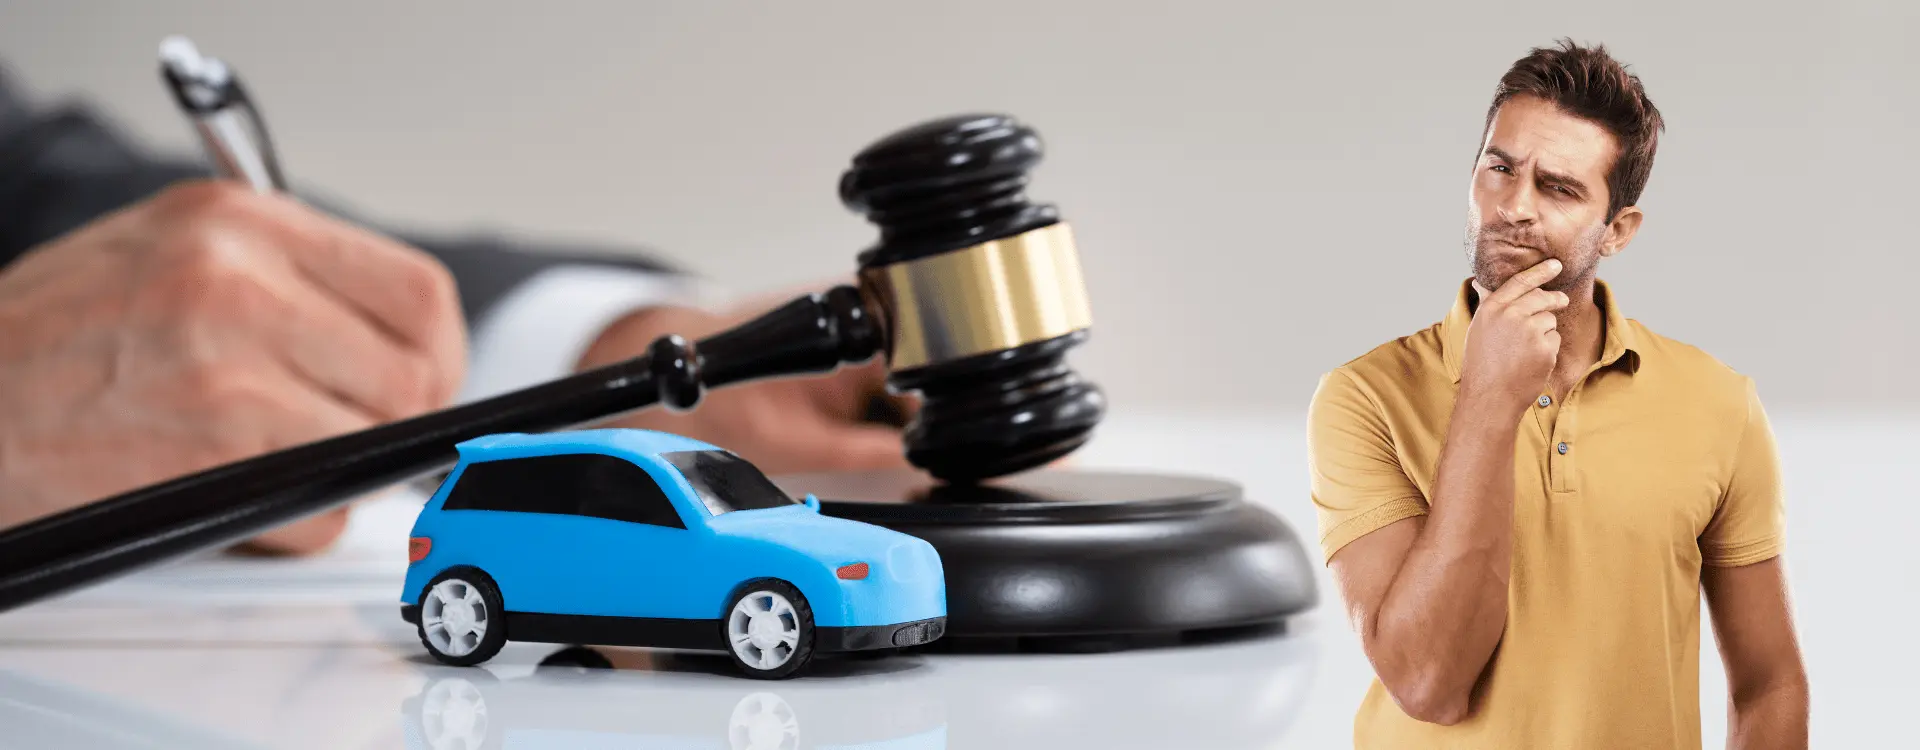 how a car accident lawyer can help maximize your settlement in the accident claim